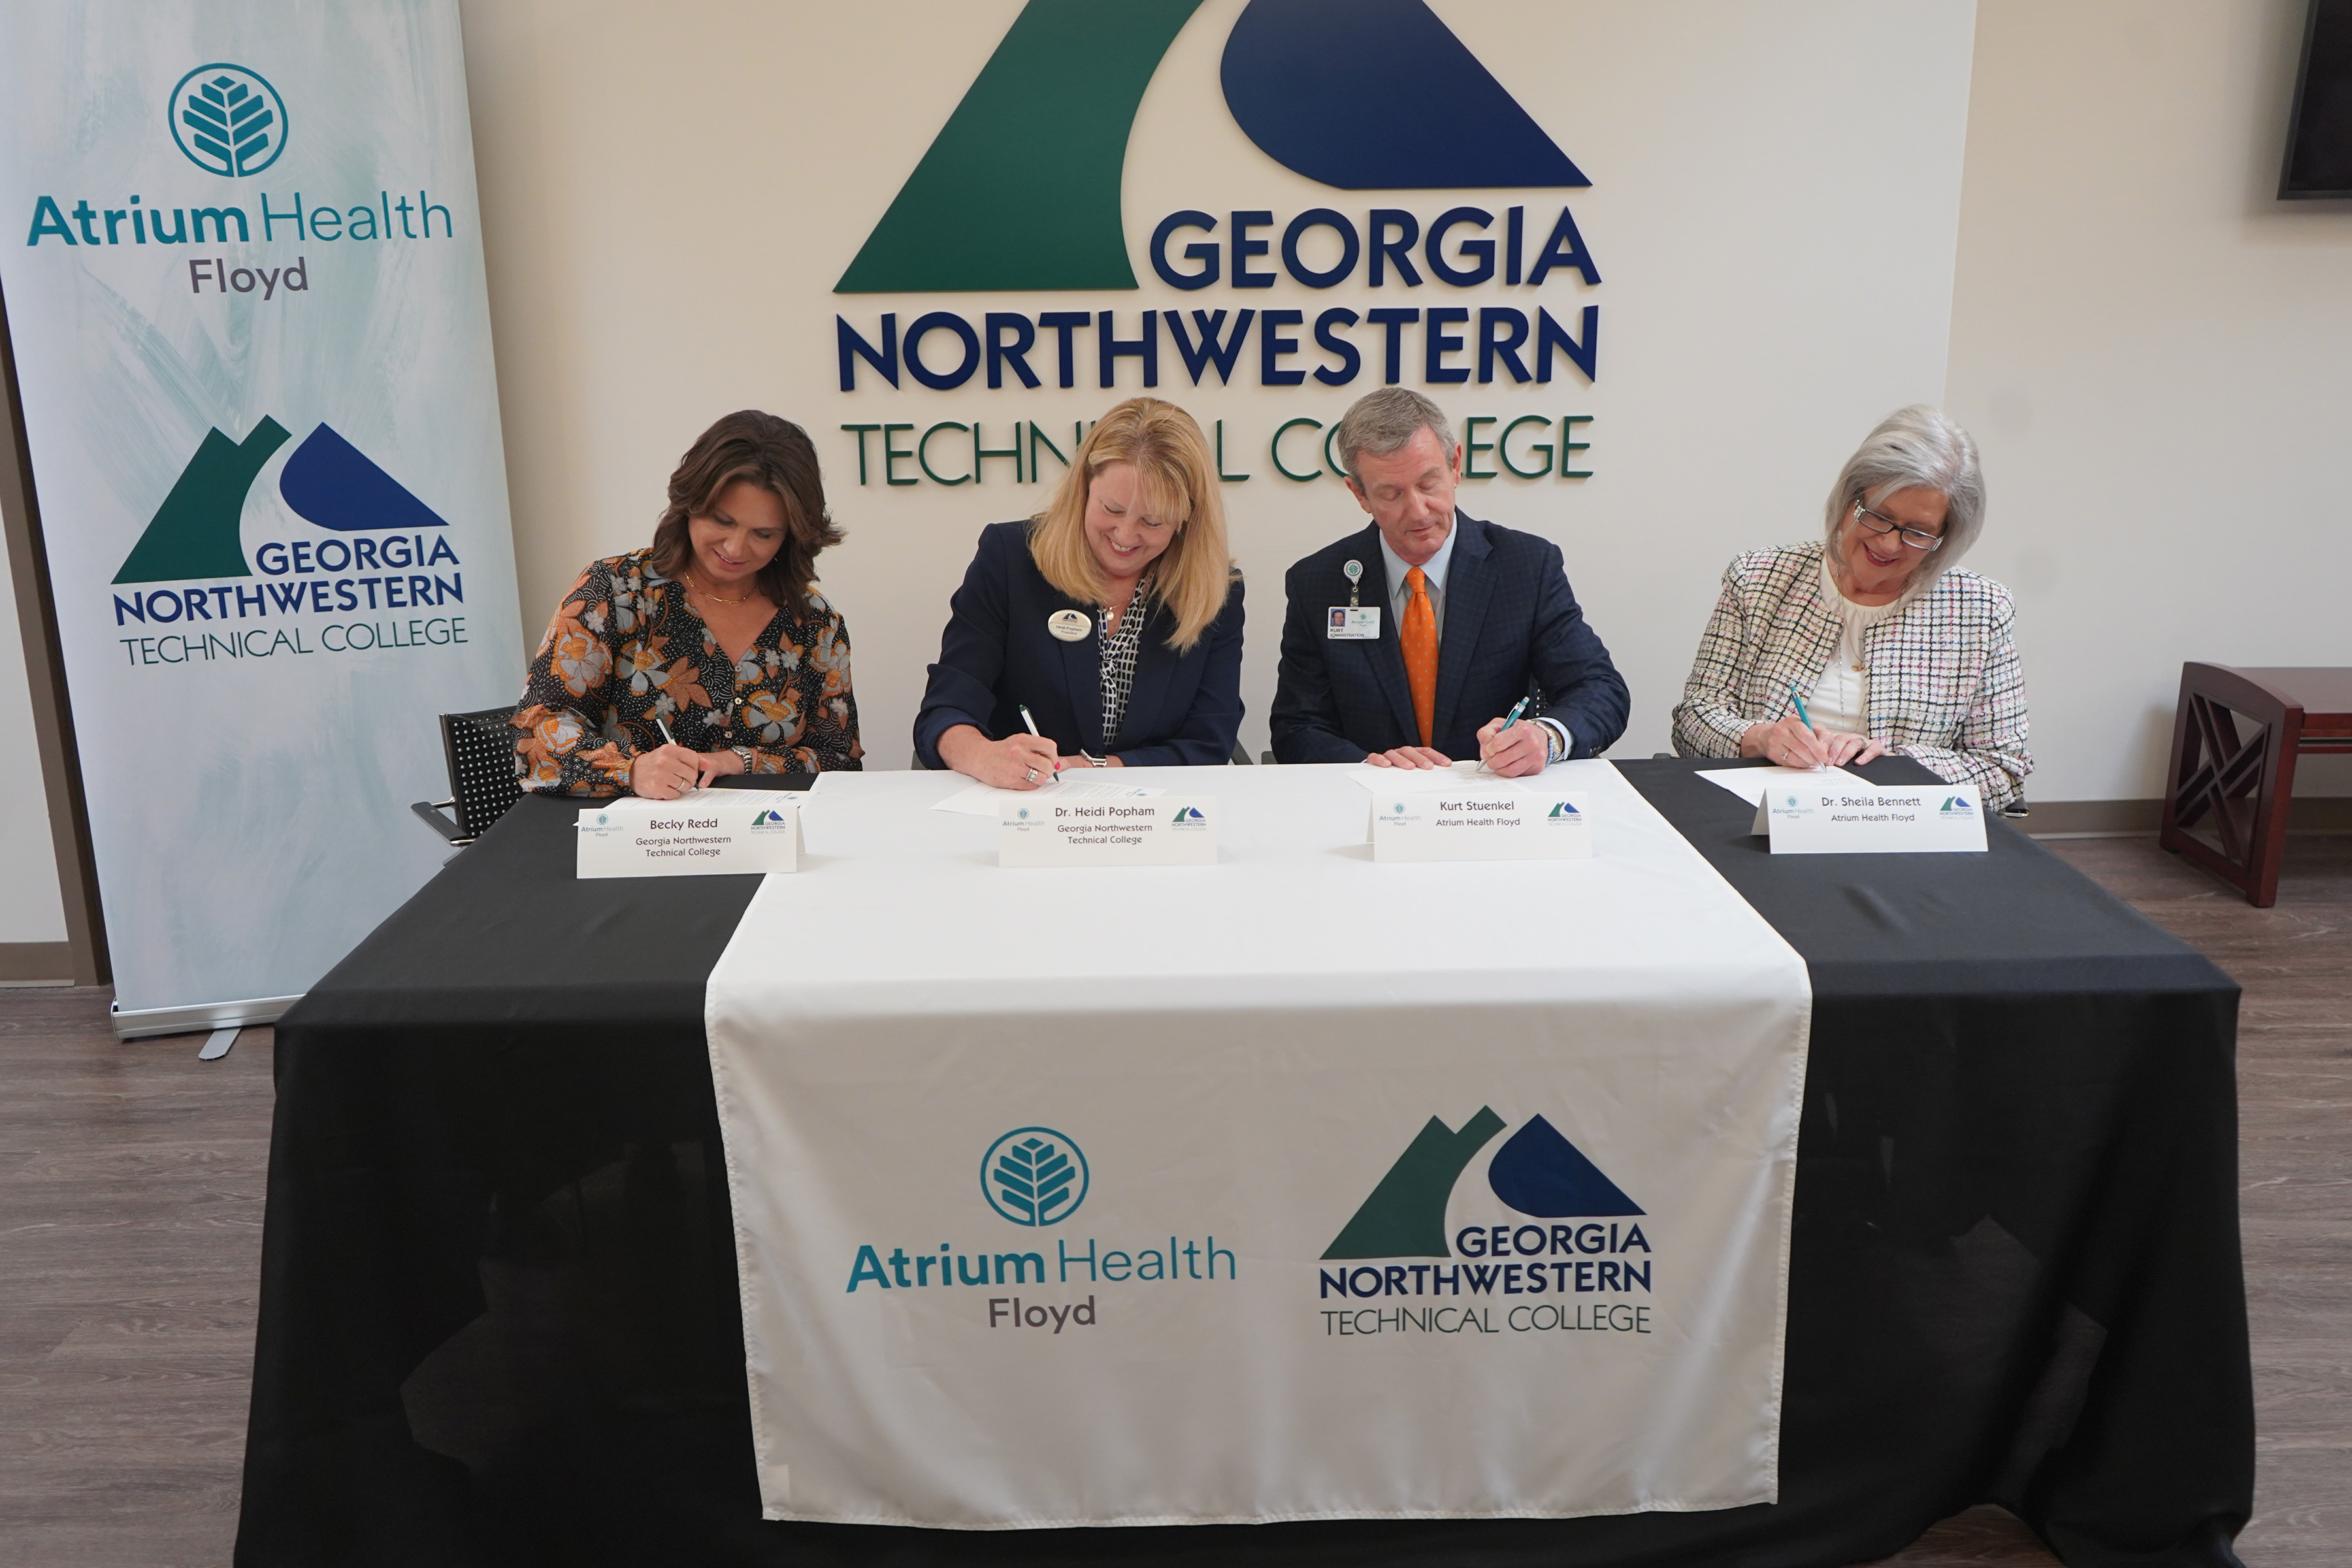 (From left) Becky Redd, GNTC Foundation chair; Dr. Heidi Popham, GNTC president; Kurt Stuenkel, Atrium Health Floyd president; and Dr. Sheila Bennett, Atrium Health Floyd senior vice president and chief of patient services, sign a new agreement designed to boost enrollment in three of GNTC’s healthcare programs and increase the number of Respiratory Therapists, Radiologic Technologists and Certified Nursing Assistants in the northwest Georgia region.
